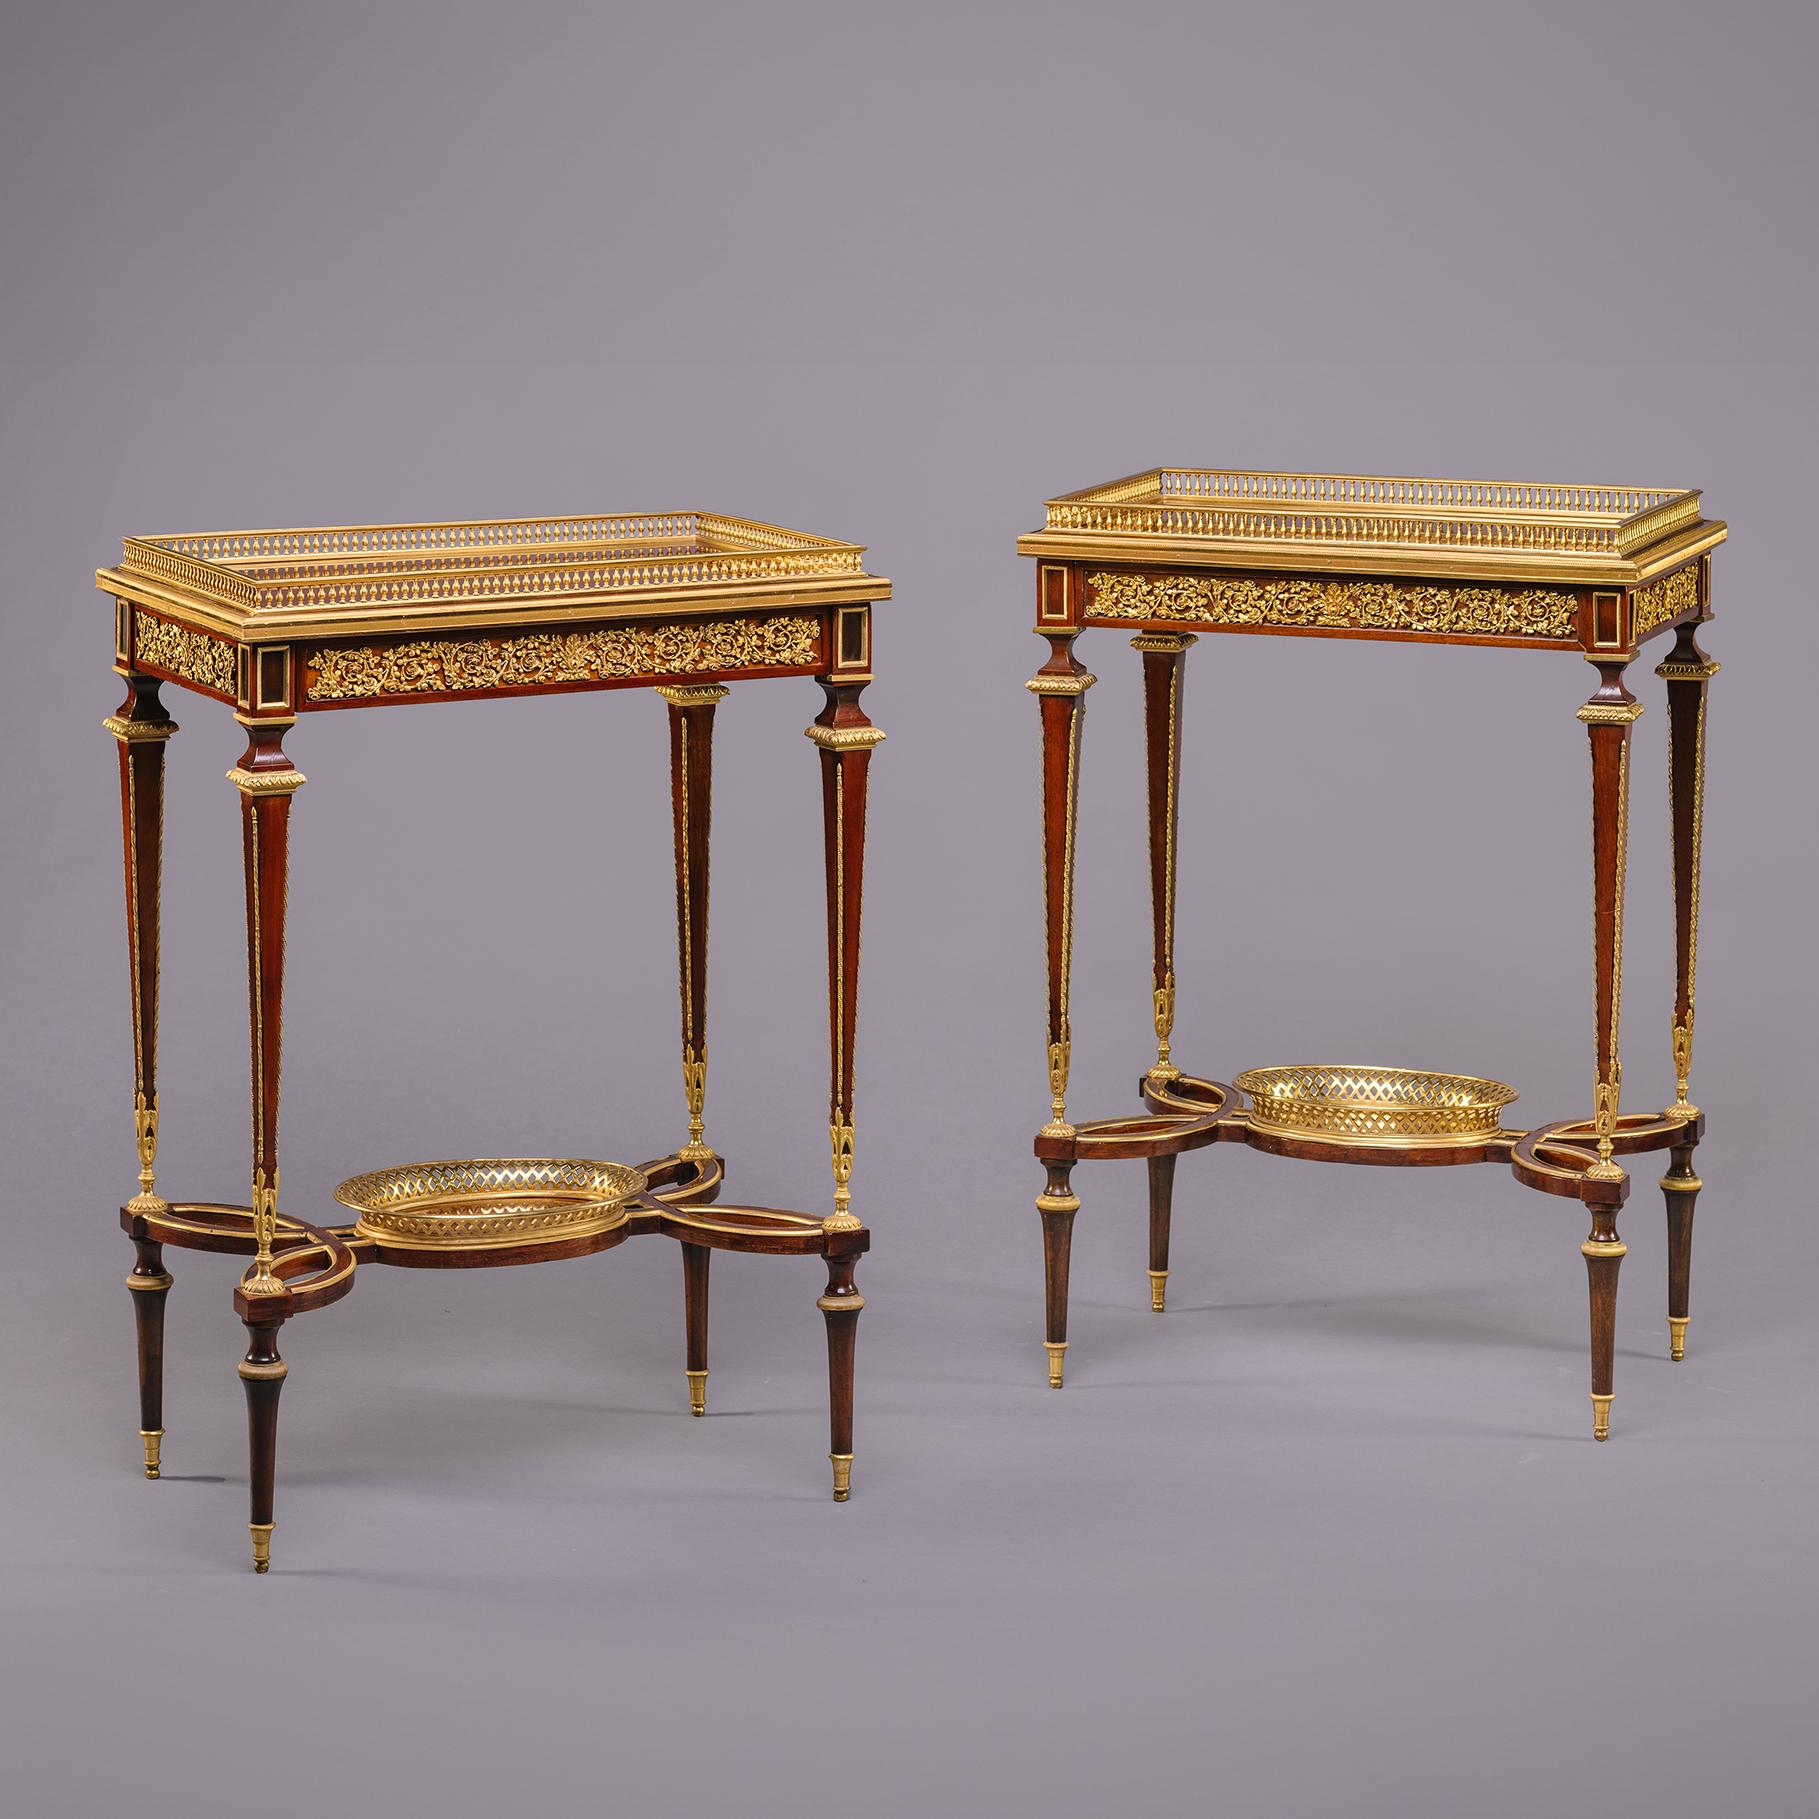 A Fine Pair of Louis XVI Style Gilt-Bronze Mounted Mahogany Occasional Tables, Attributed to Henry Dasson. 

France Circa 1880.

Henry Dasson (1825-1896) was one of the finest makers of gilt-bronze mounted furniture in the nineteenth century. Unlike